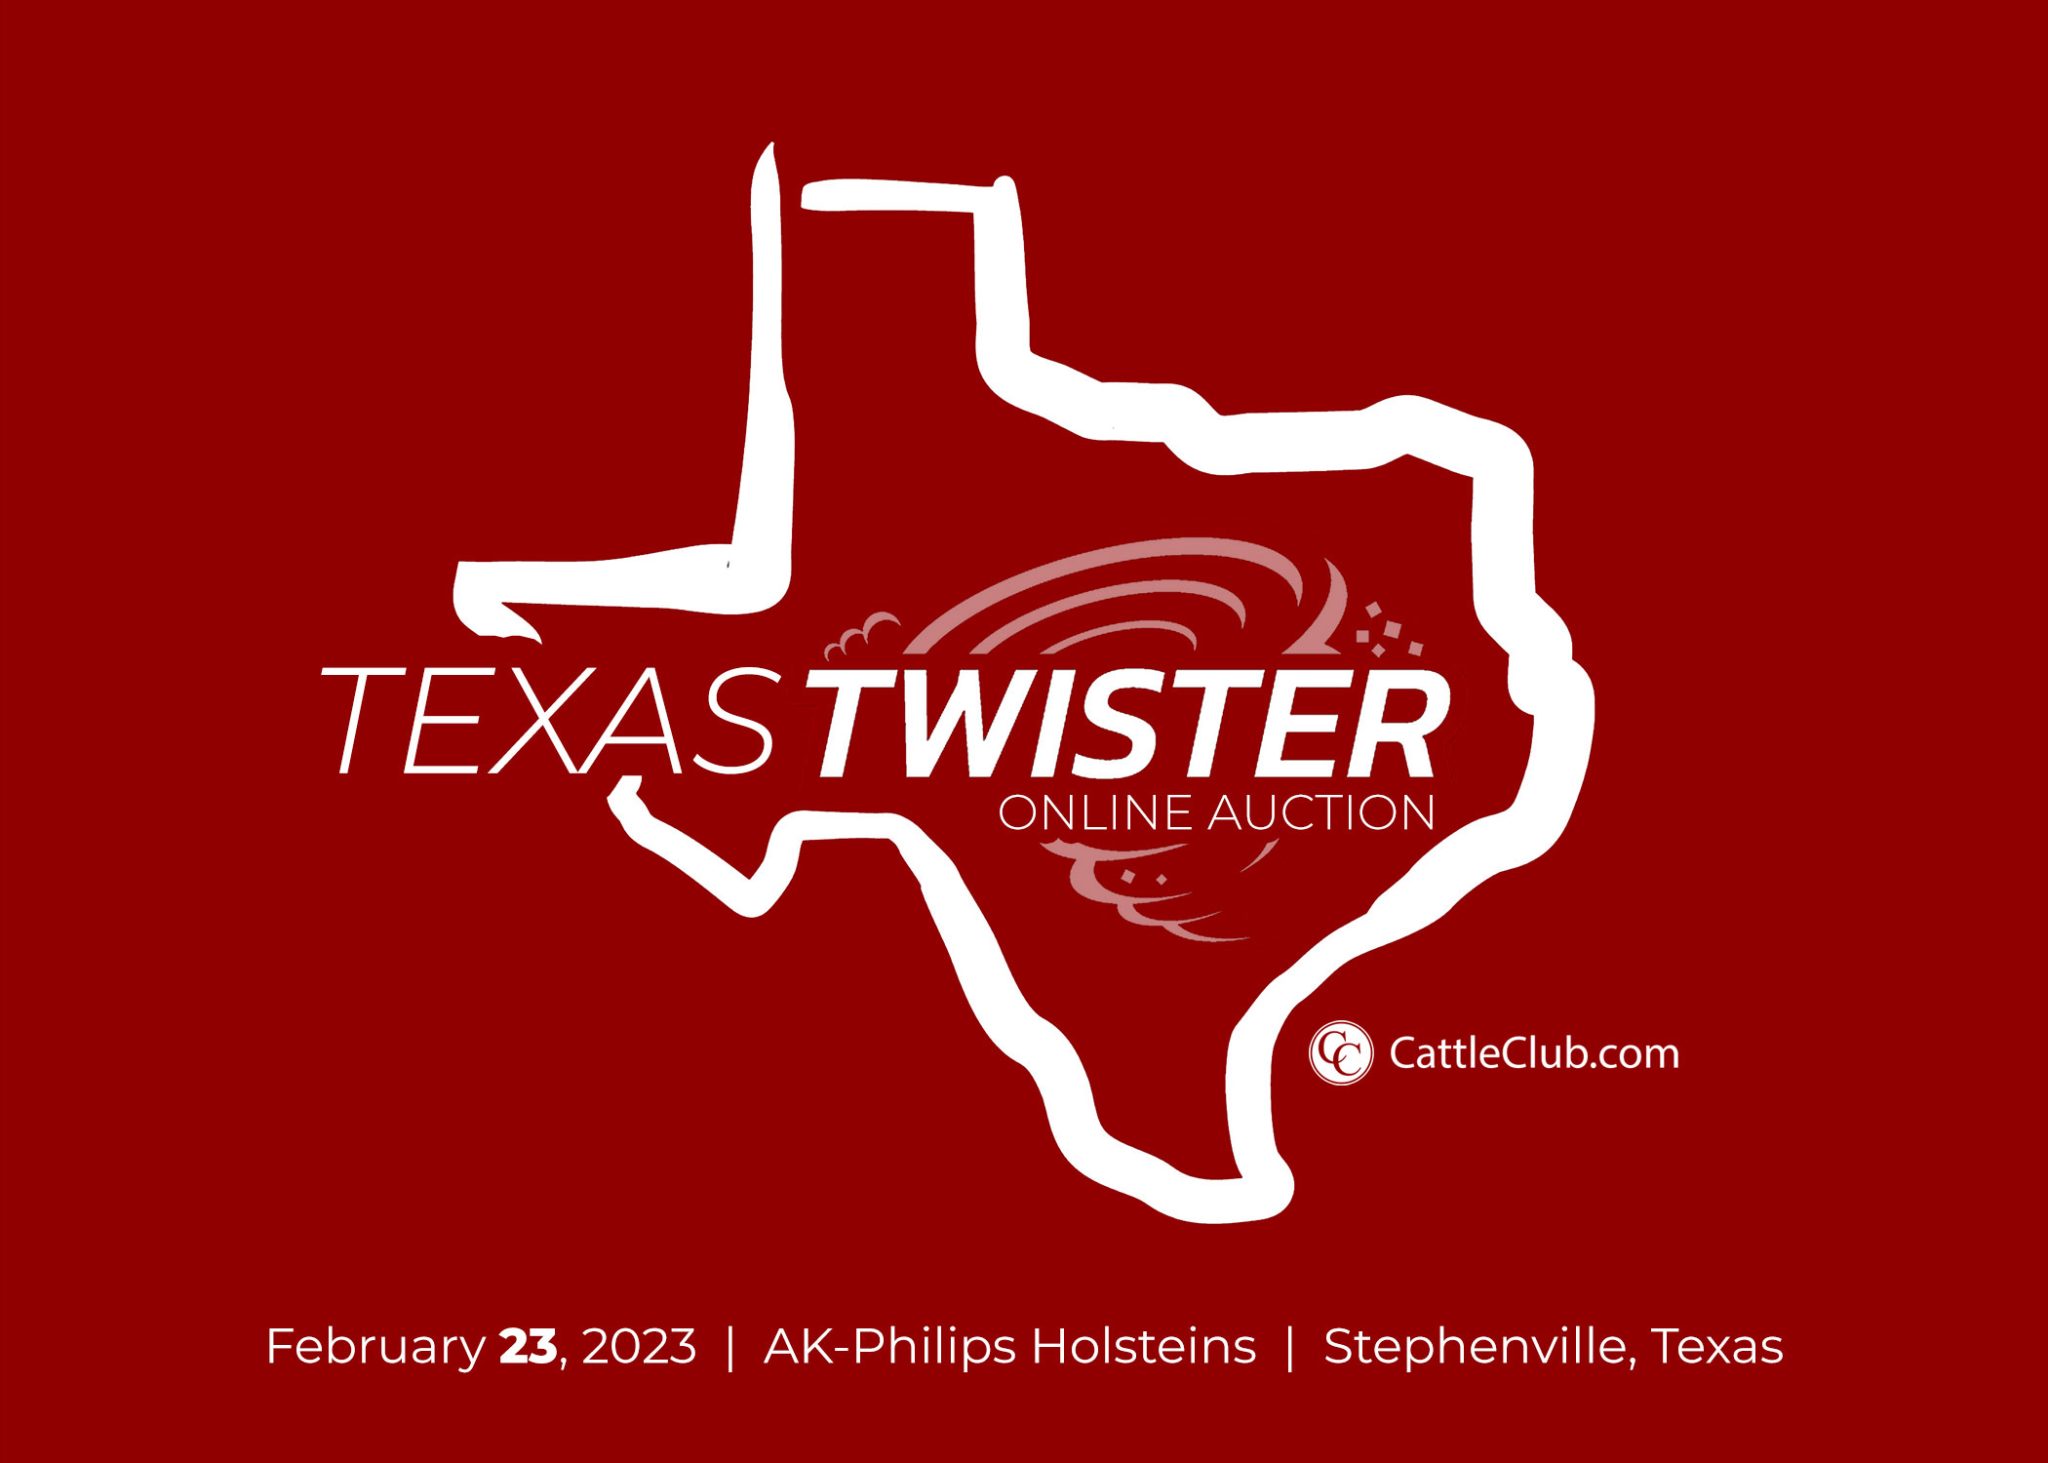 Texas Twister Online Auction